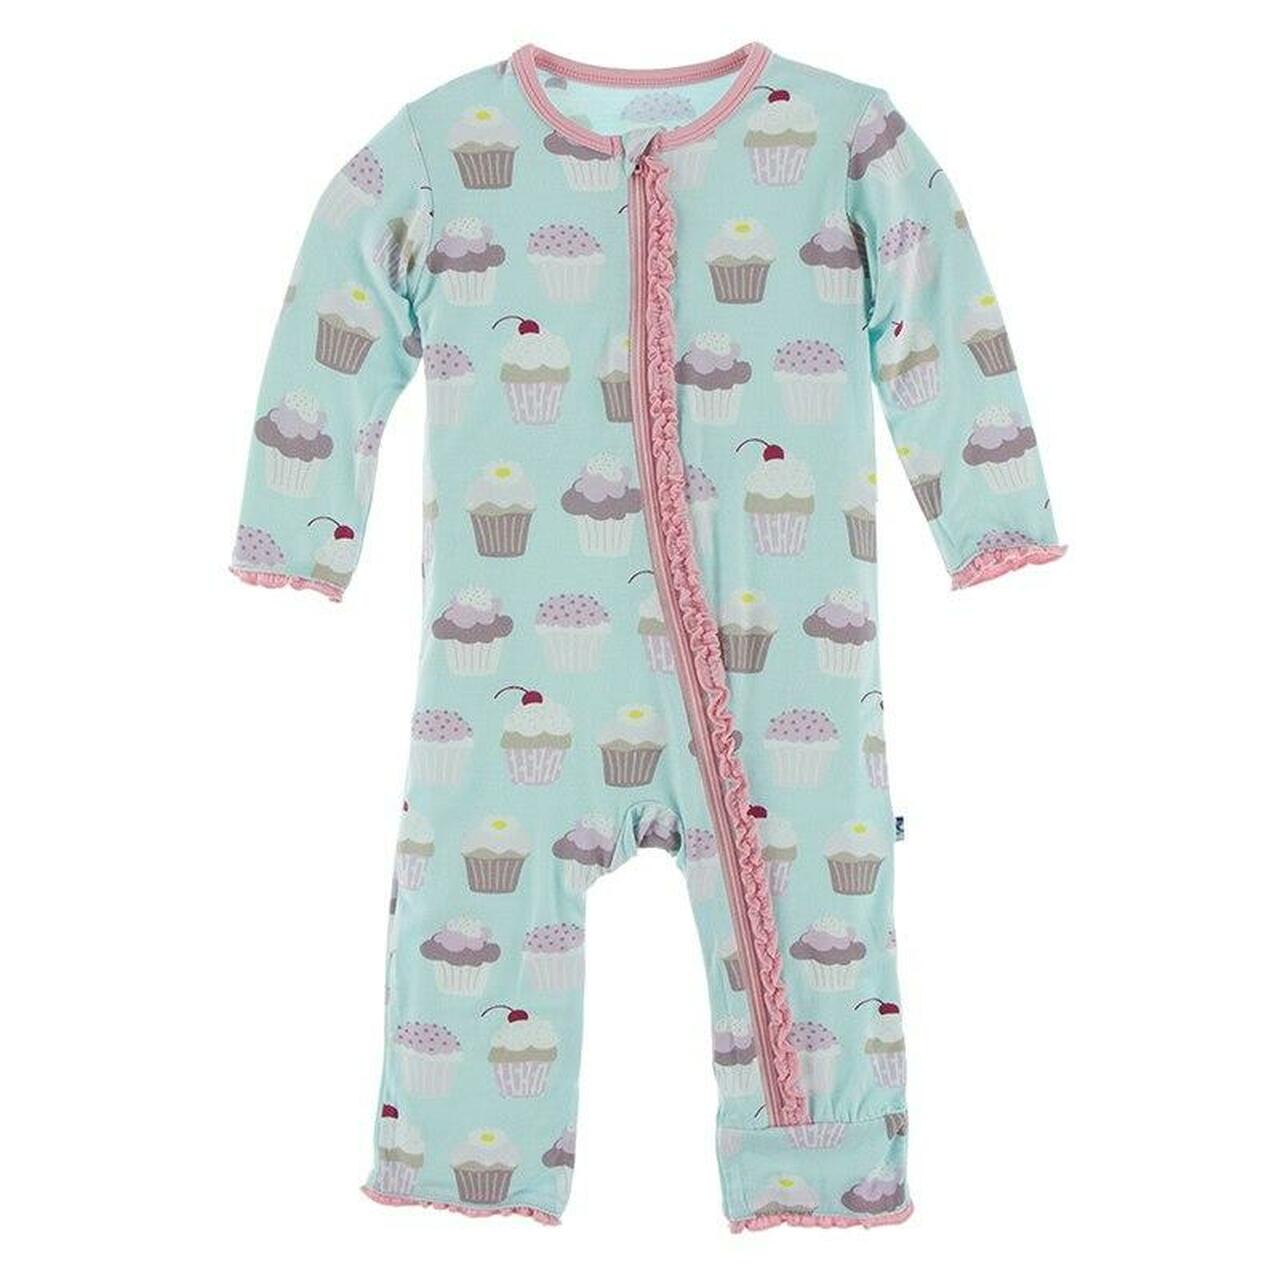 Summer Sky Cupcakes Ruffle Coverall w/ Snaps